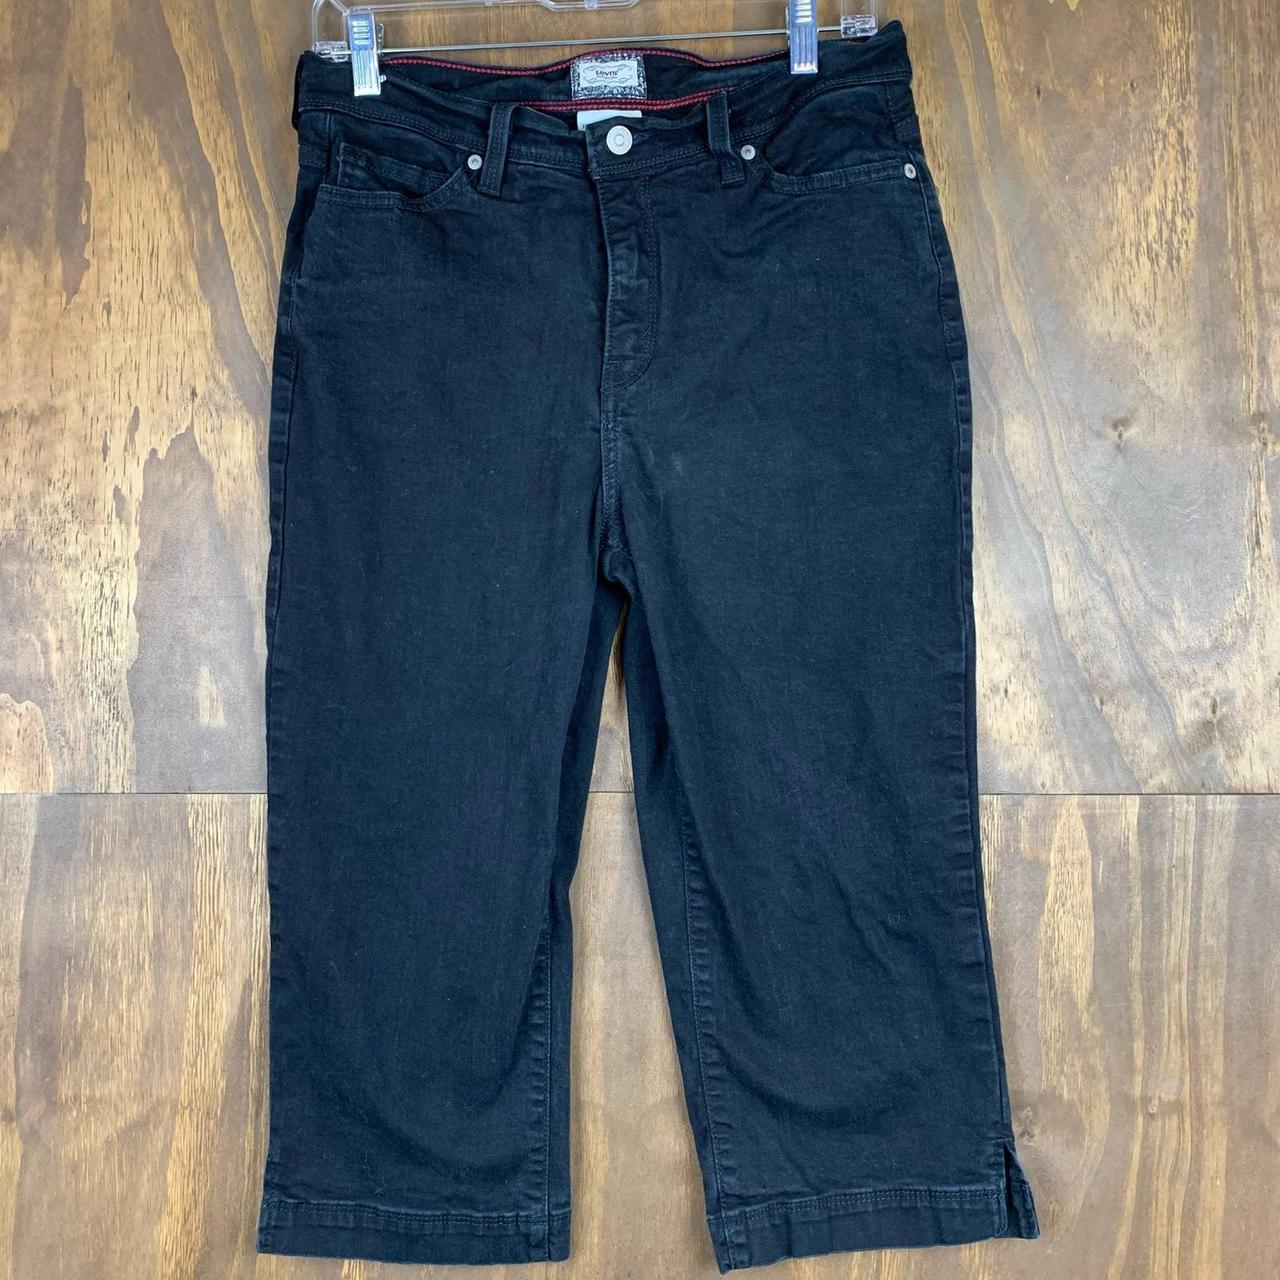 Levis 512 Womens Jeans Black Perfectly Slimming... - Depop